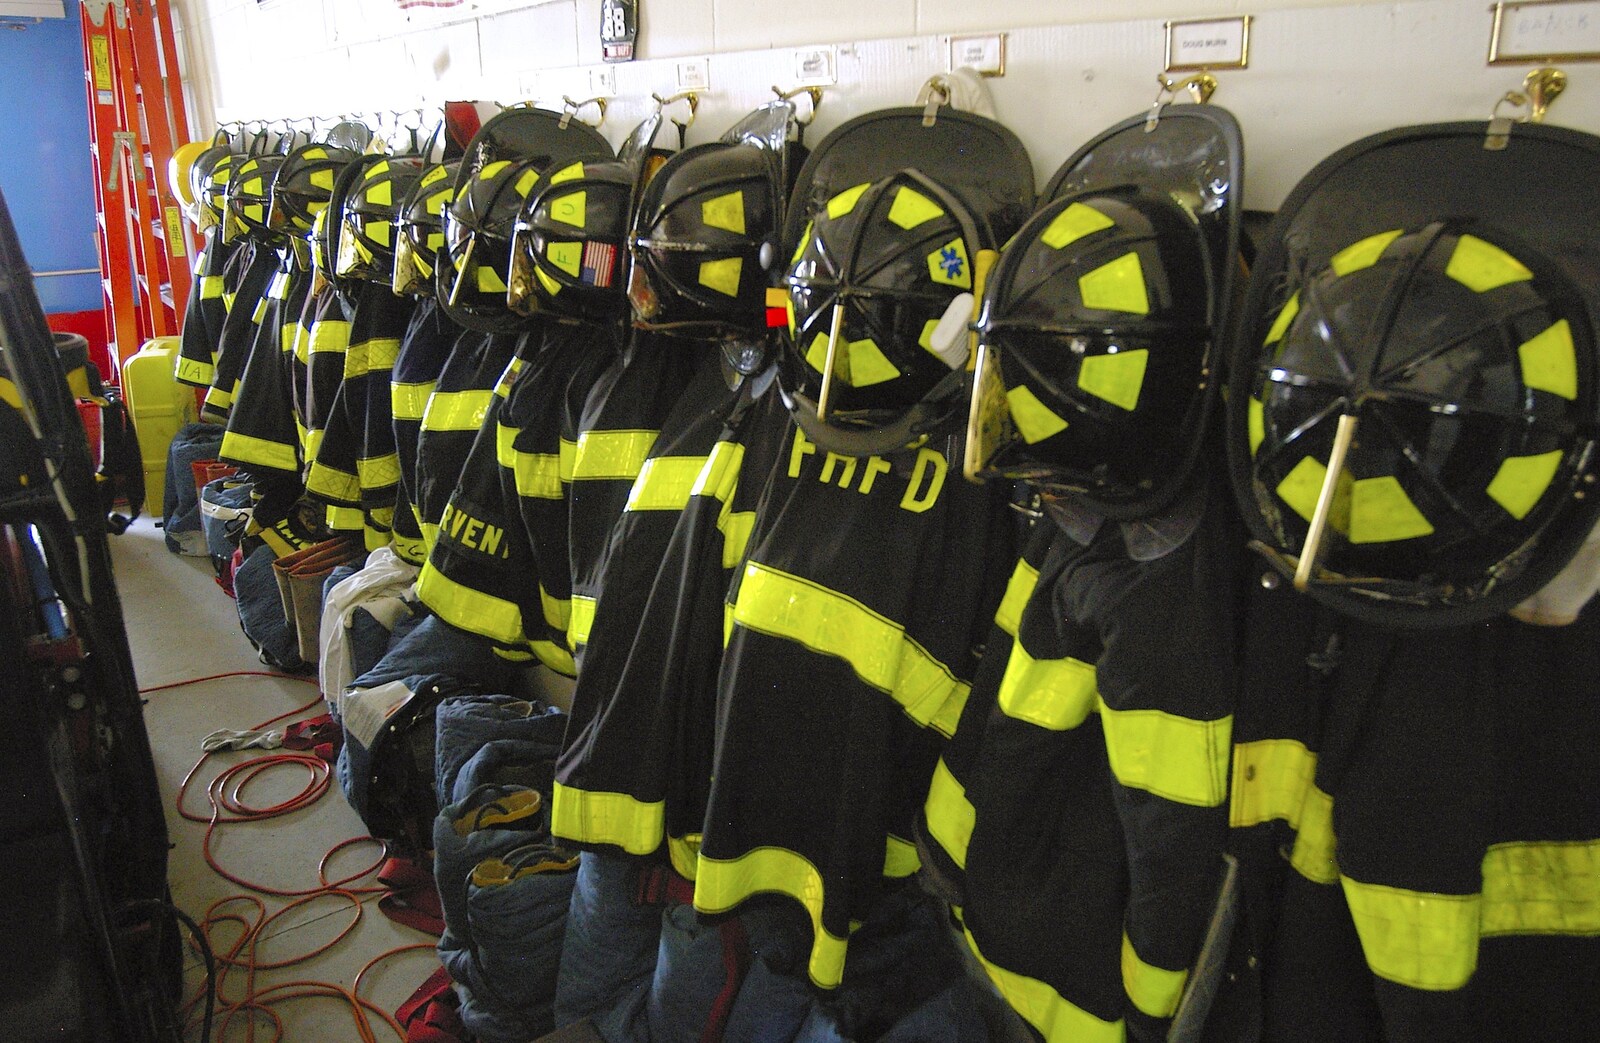 Firemen's jackets from Phil and the Fair Harbor Fire Engine, Fire Island, New York State, US - 30th April 2006